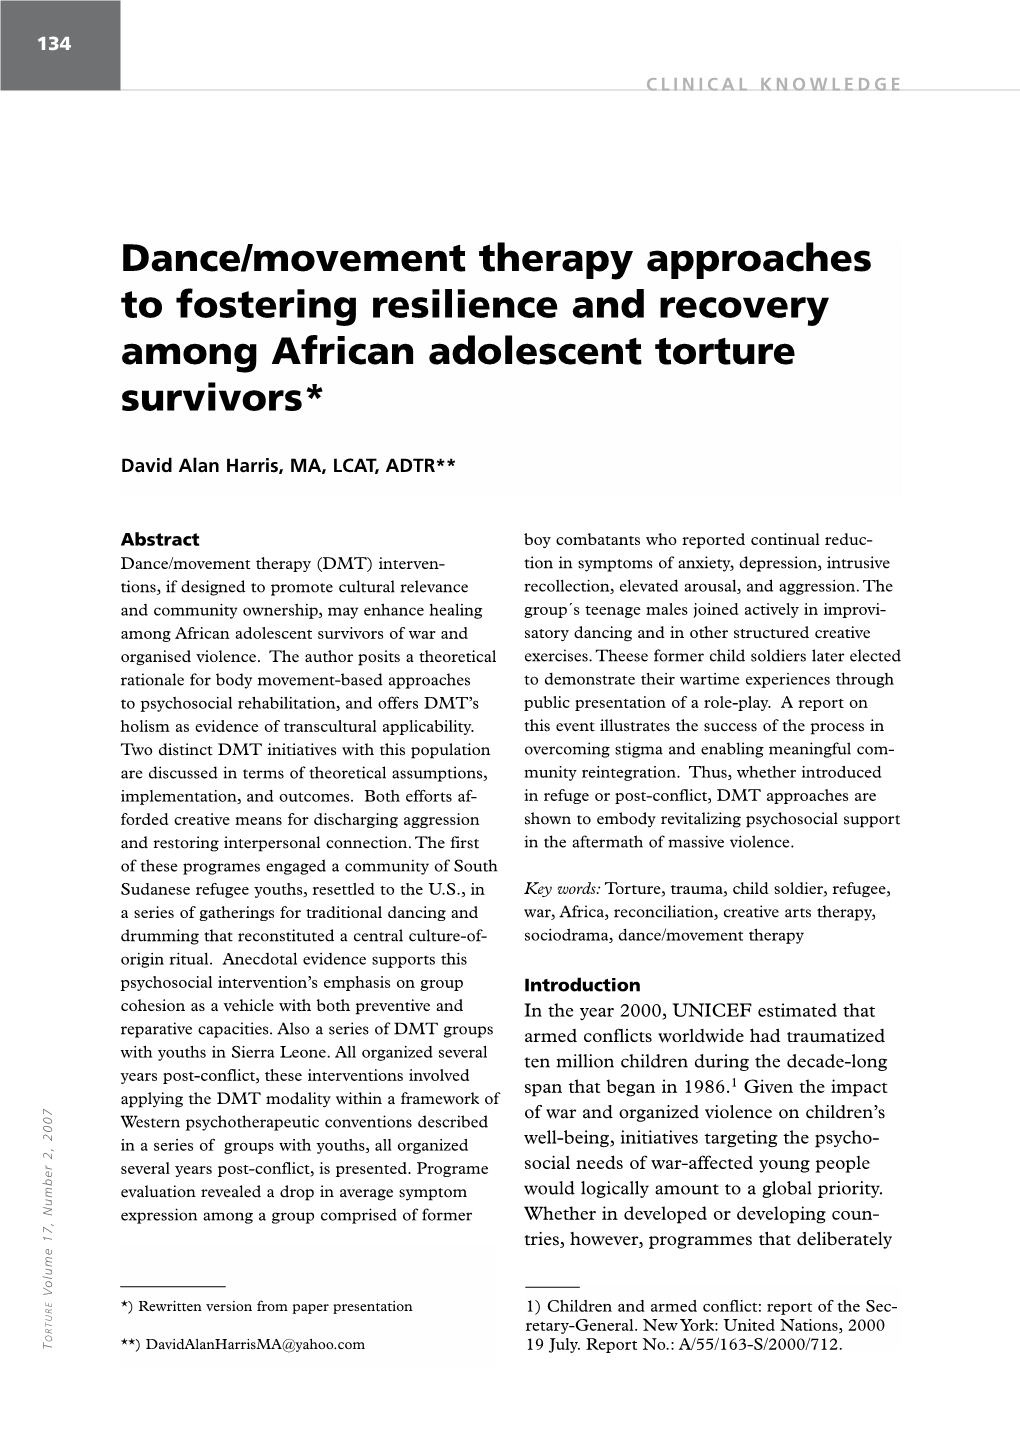 Dance/Movement Therapy Approaches to Fostering Resilience and Recovery Among African Adolescent Torture Survivors*